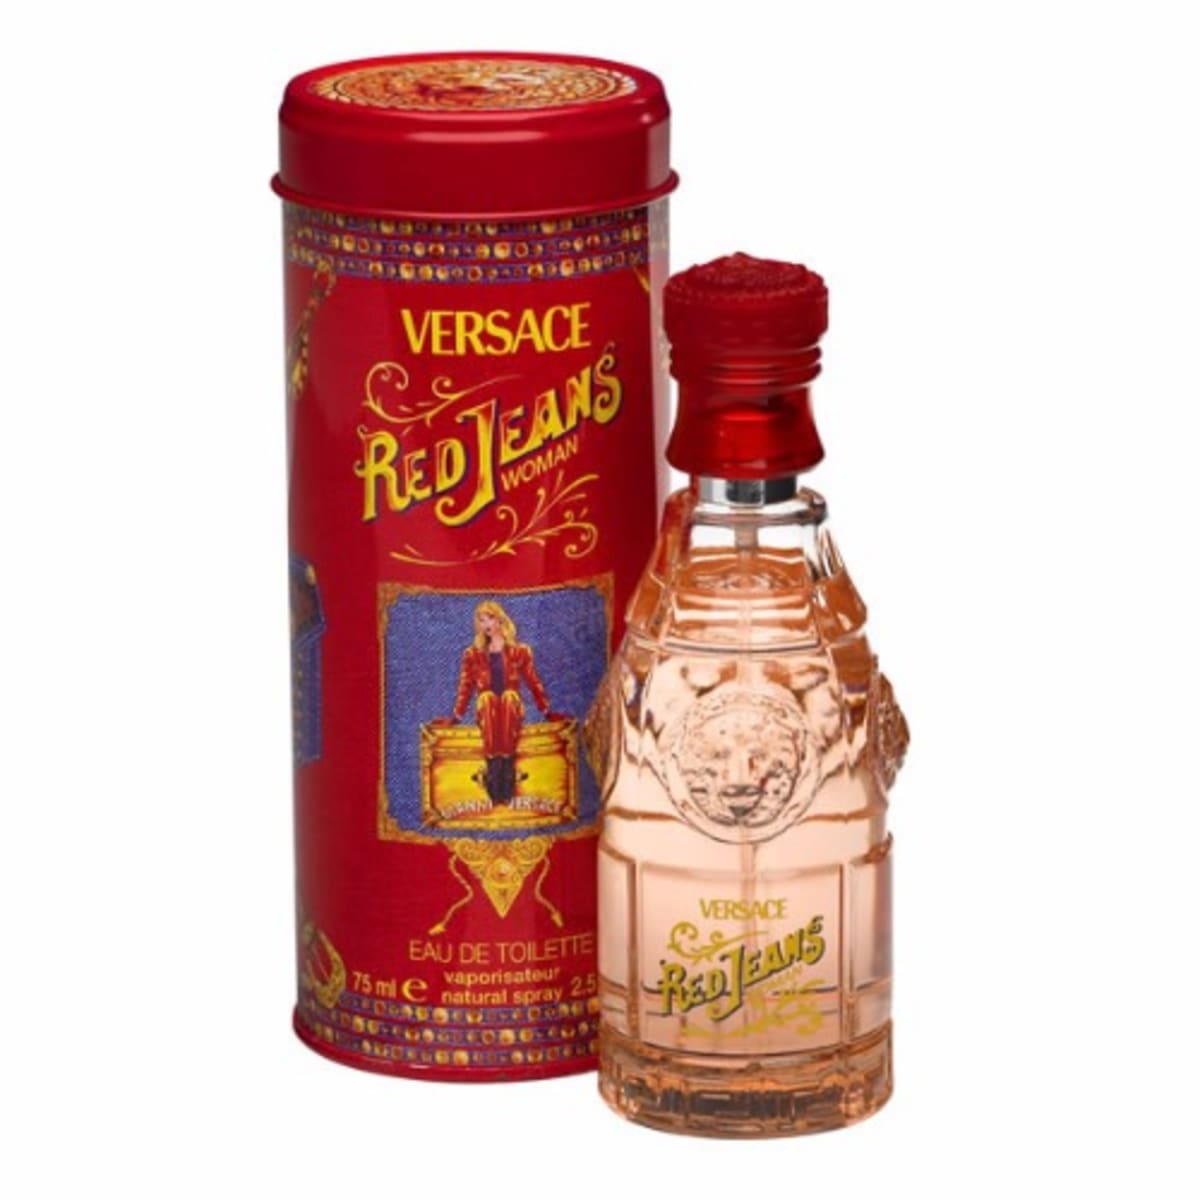 Versace Red Jeans Eau Online Her De Shopping Toilette Konga For | - 75ml